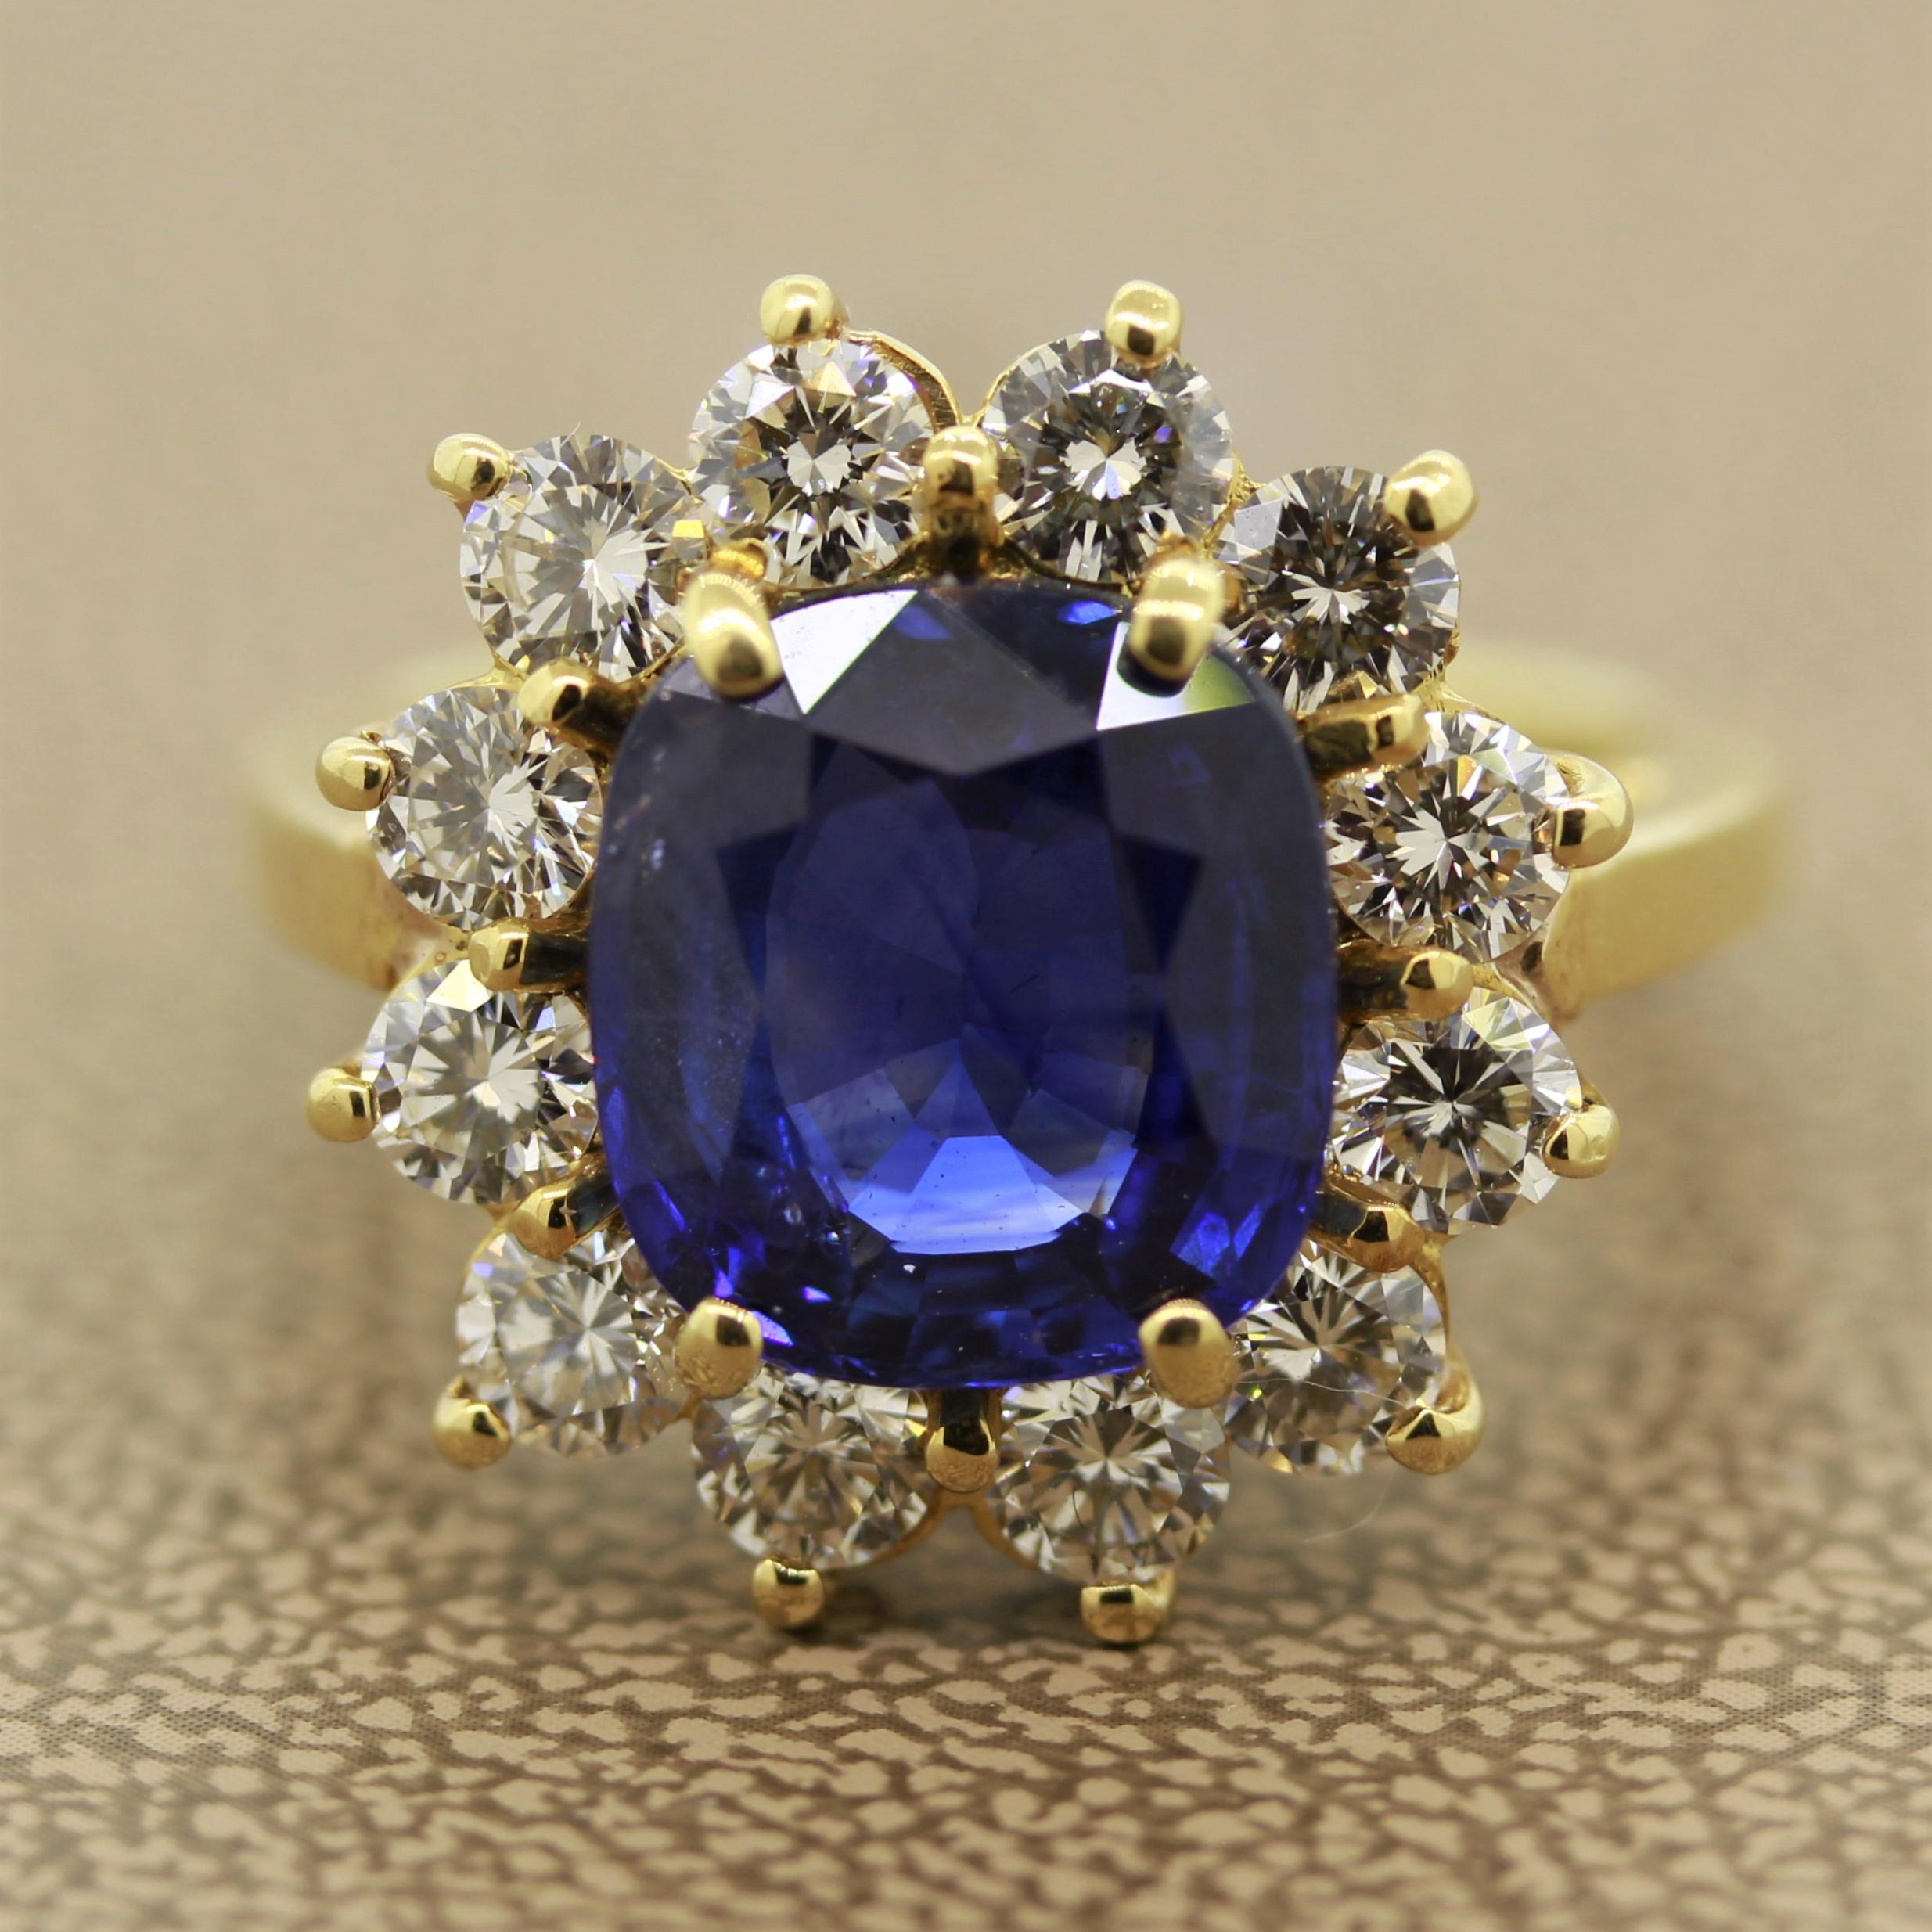 A classic haloed sapphire ring featuring a 4.96 carat blue sapphire certified by the GIA. The sapphire has a pleasing blue color typical from Ceylon, Sri Lanka, which has been a classic source of fine sapphires for hundreds of years. It is haloed by